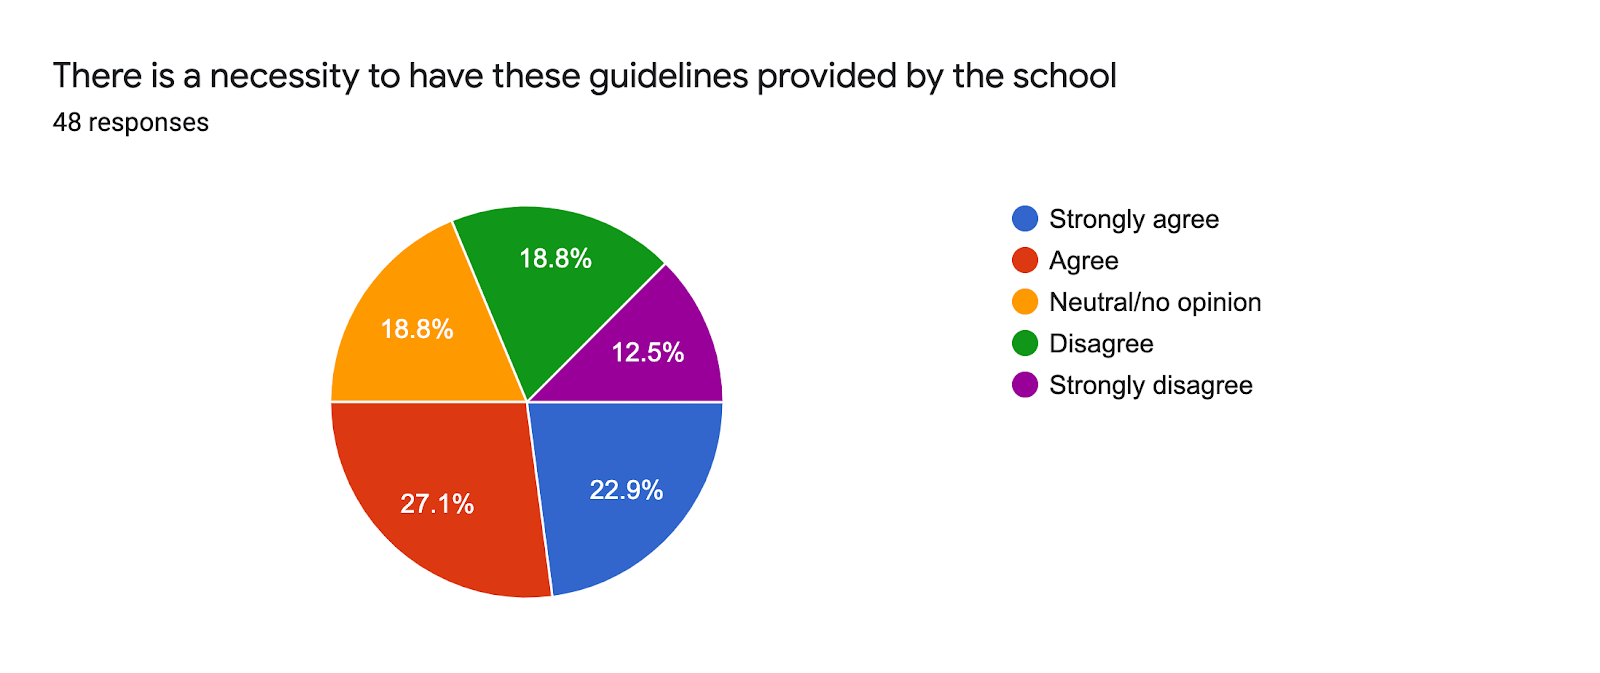 Forms response chart. Question title: There is a necessity to have these guidelines provided by the school. Number of responses: 48 responses.